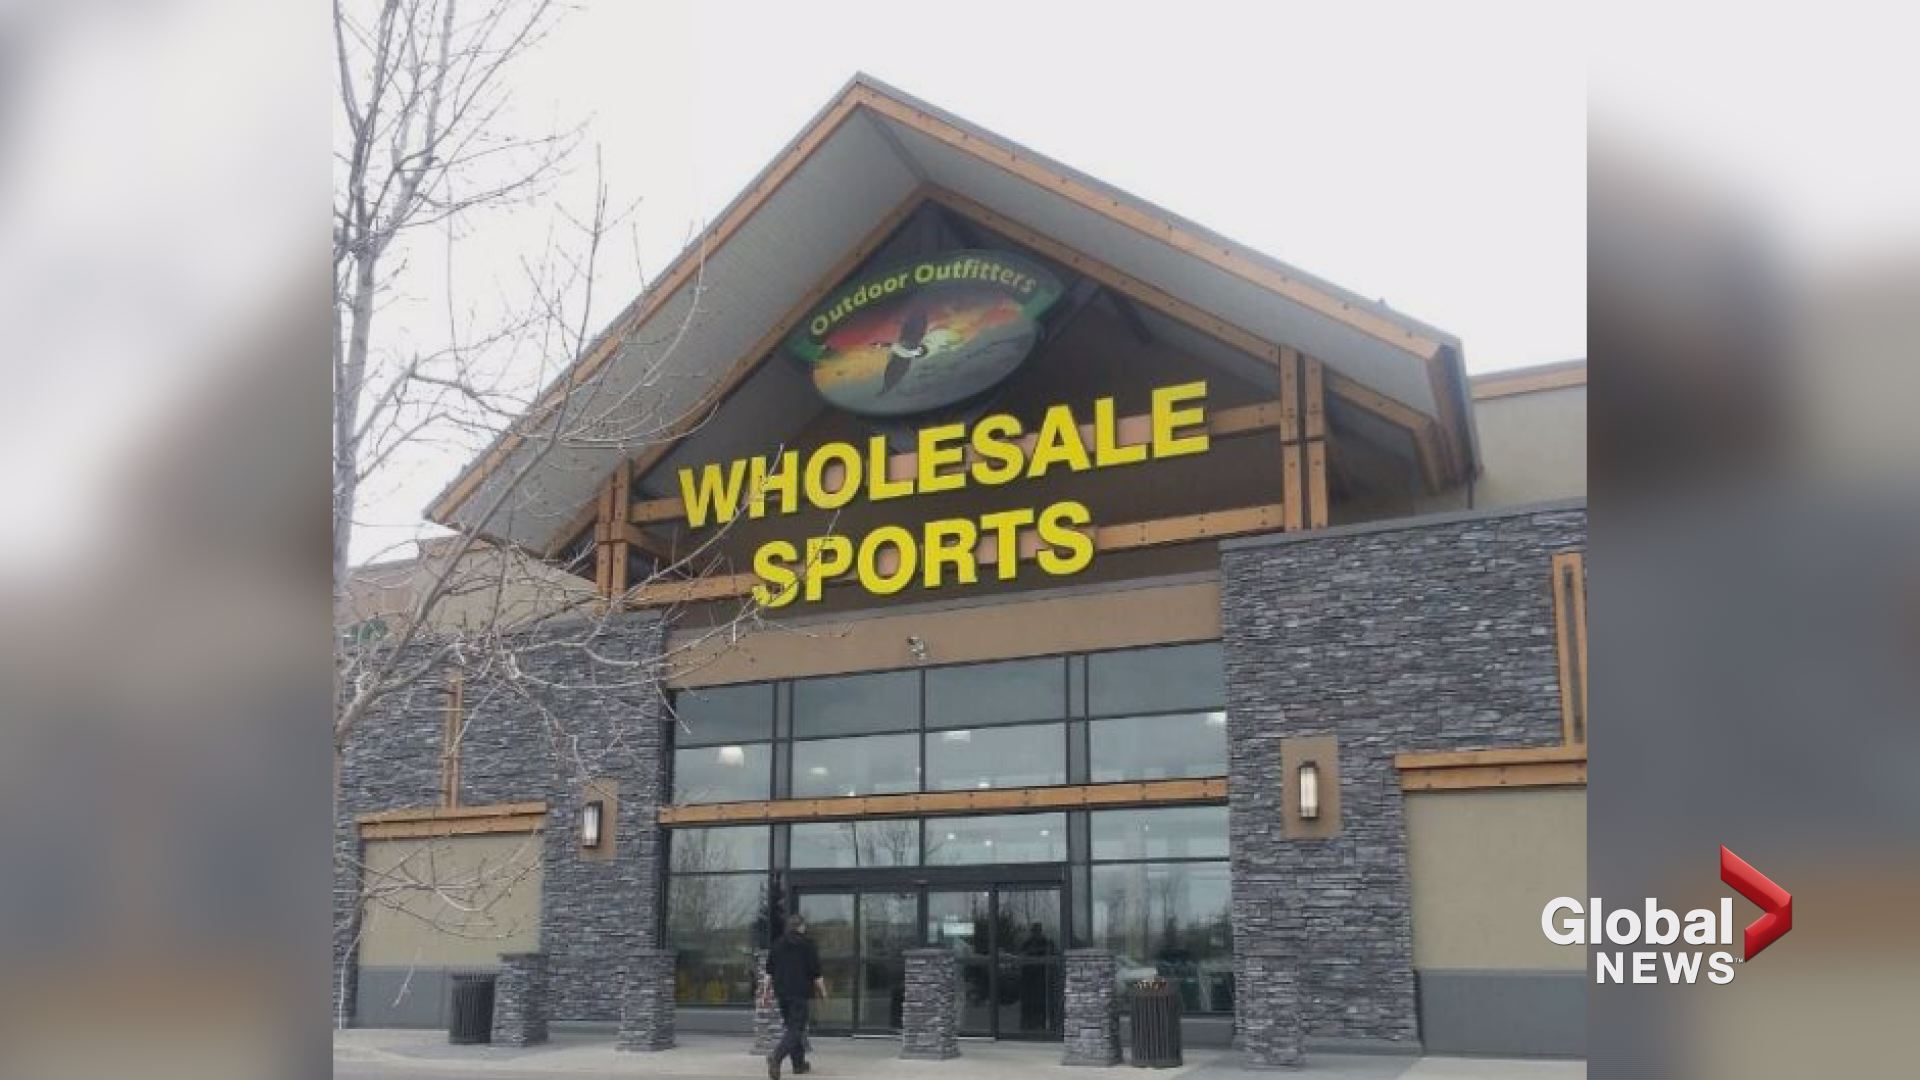 12 Wholesale Sports stores in Western Canada closing after 30